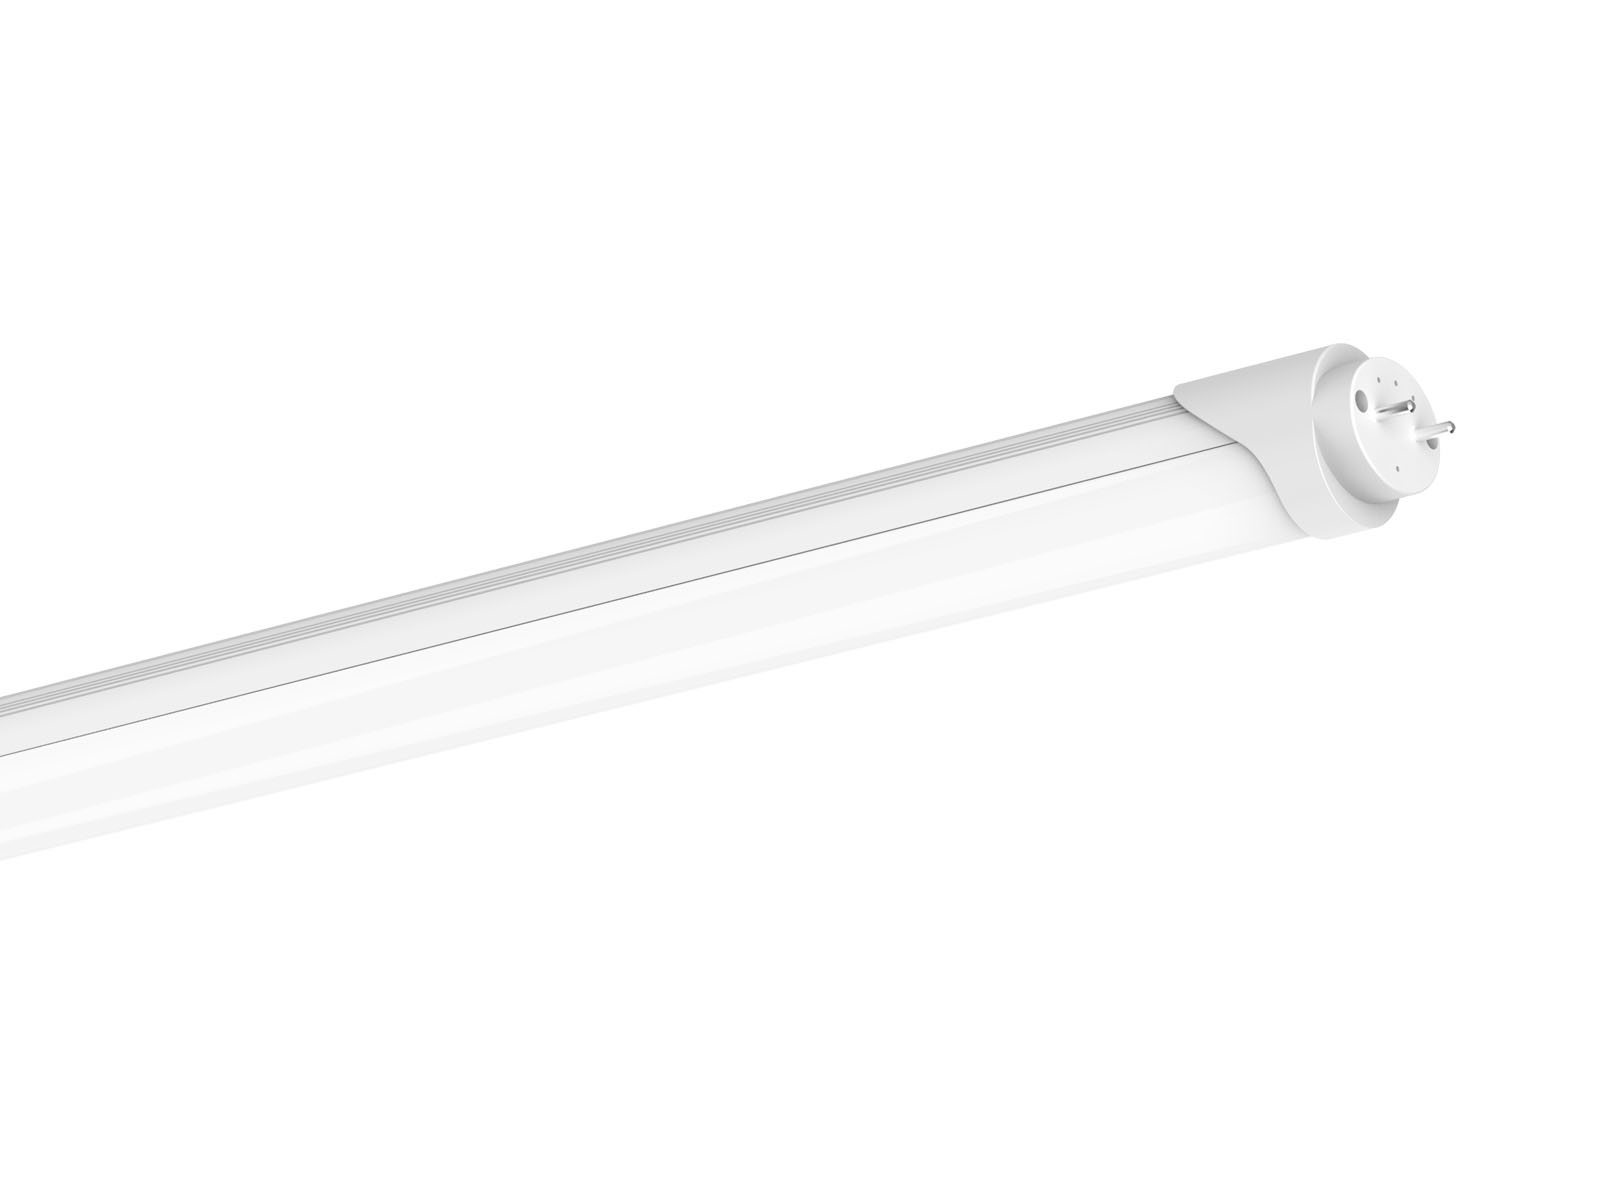 AL-PC Clear or Frosted LED Tube Light Fixture